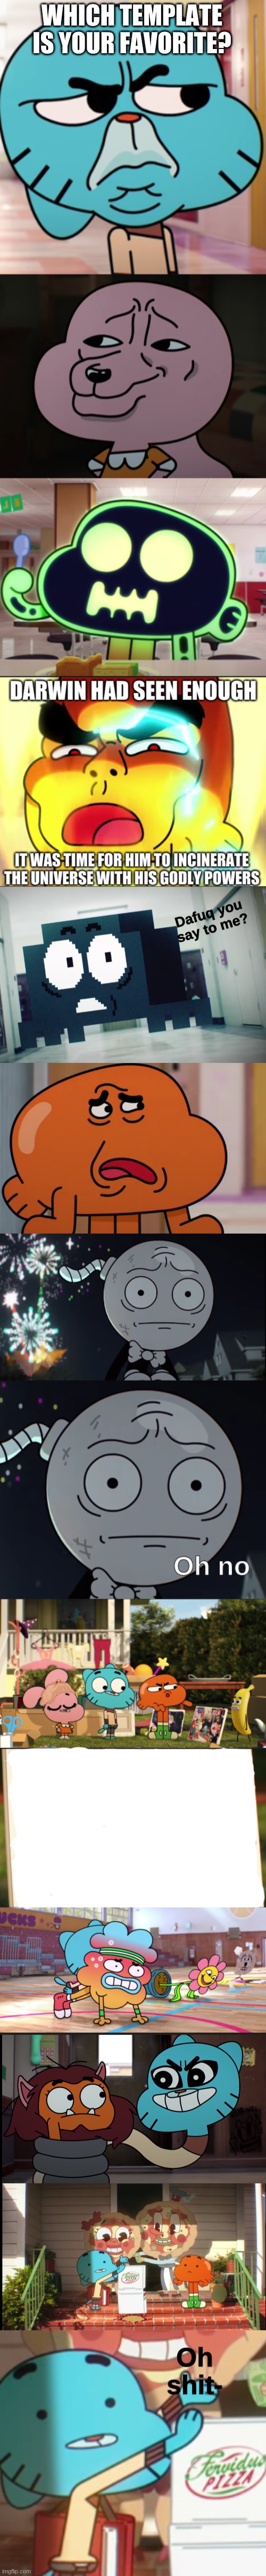 WHICH TEMPLATE IS YOUR FAVORITE? | image tagged in gumball wtf,smug,dead,godwin,dafuq you say to me,dafuq | made w/ Imgflip meme maker